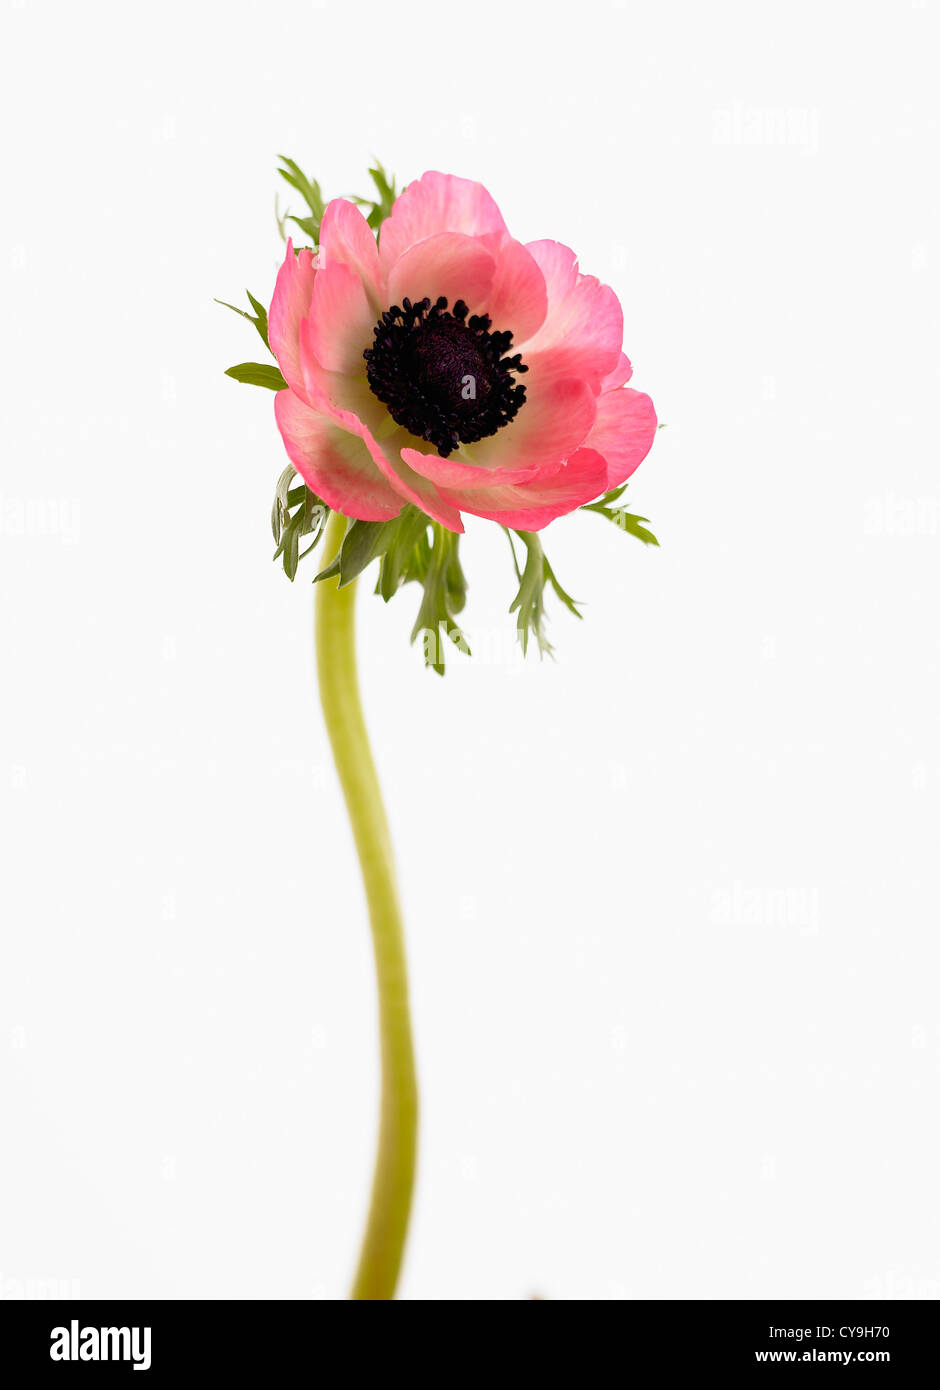 Anemone coronaria, Garden anemone, Single open pink flower on a stem against a white. Stock Photo